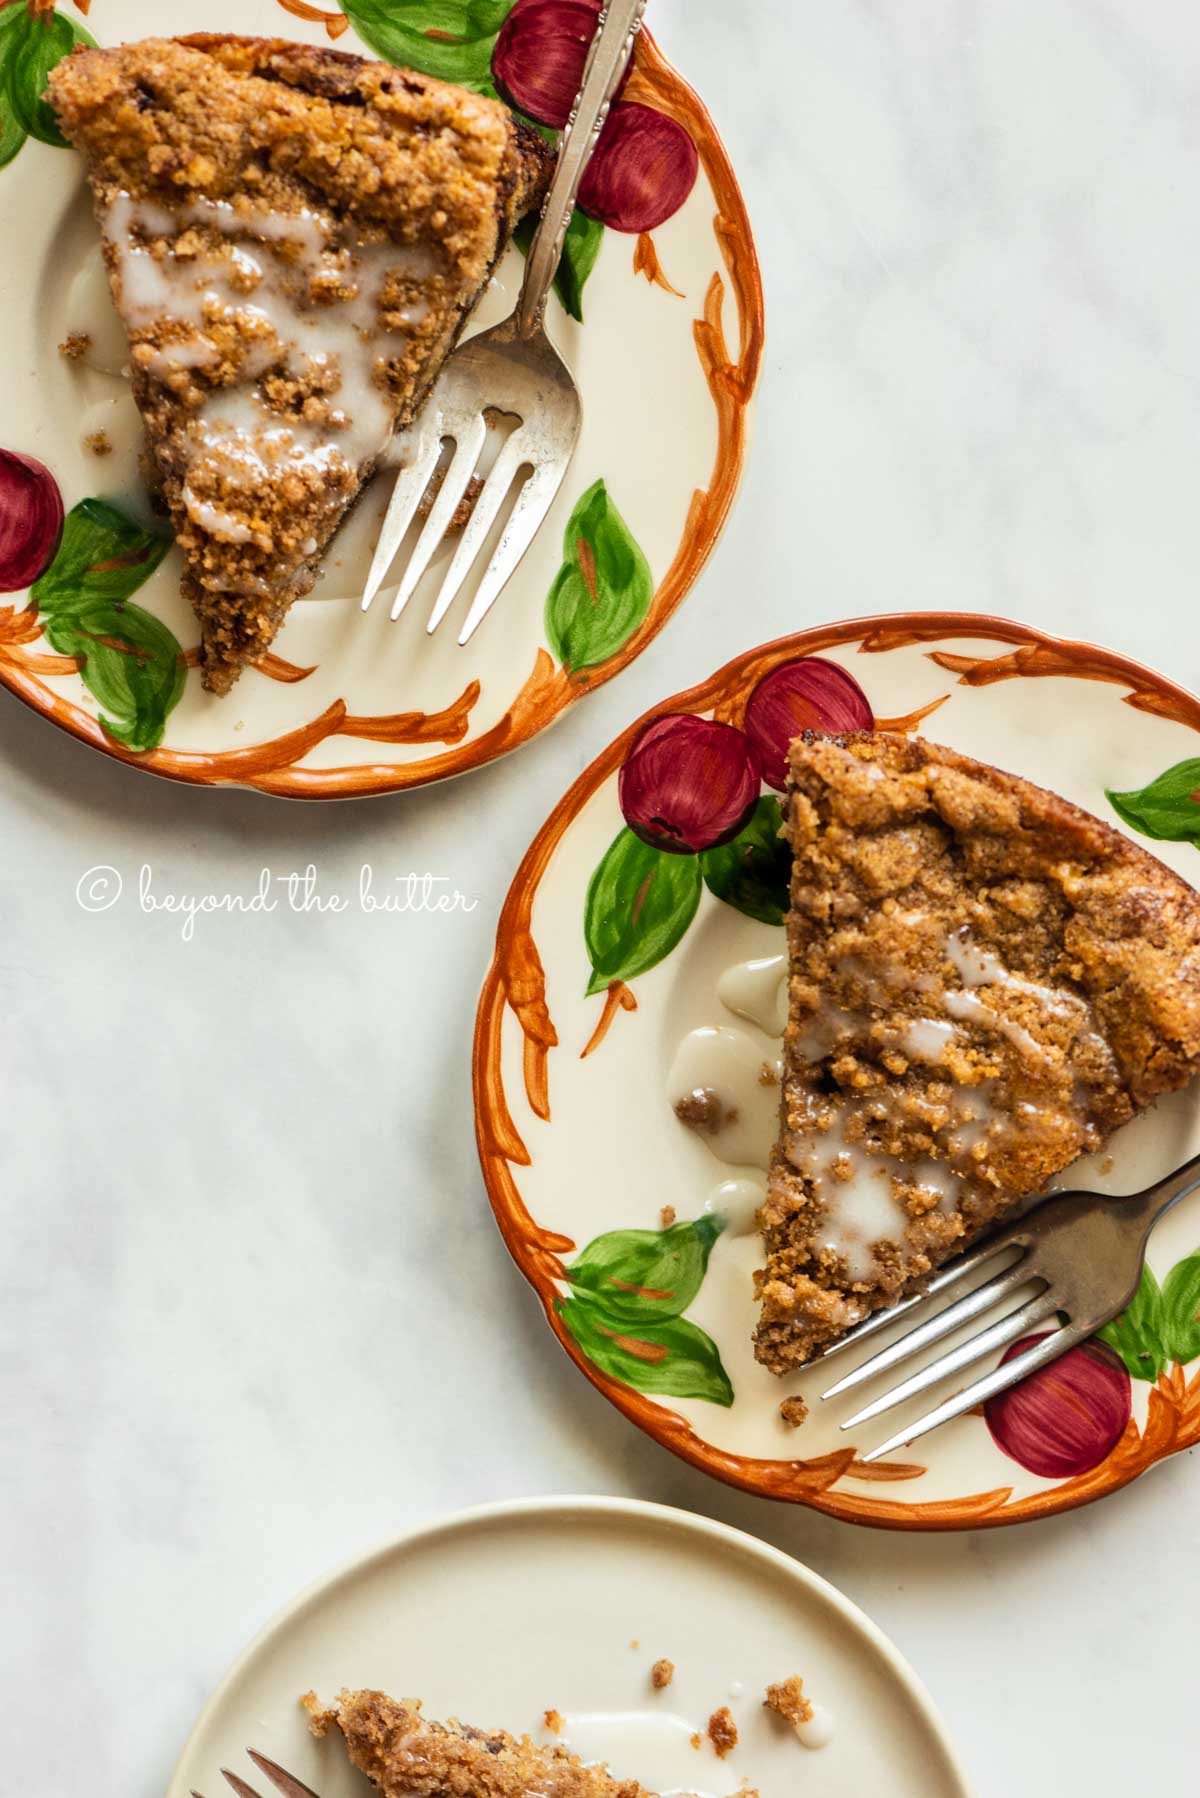 Slices of apple coffee cake on dessert plates | All Images © Beyond the Butter™